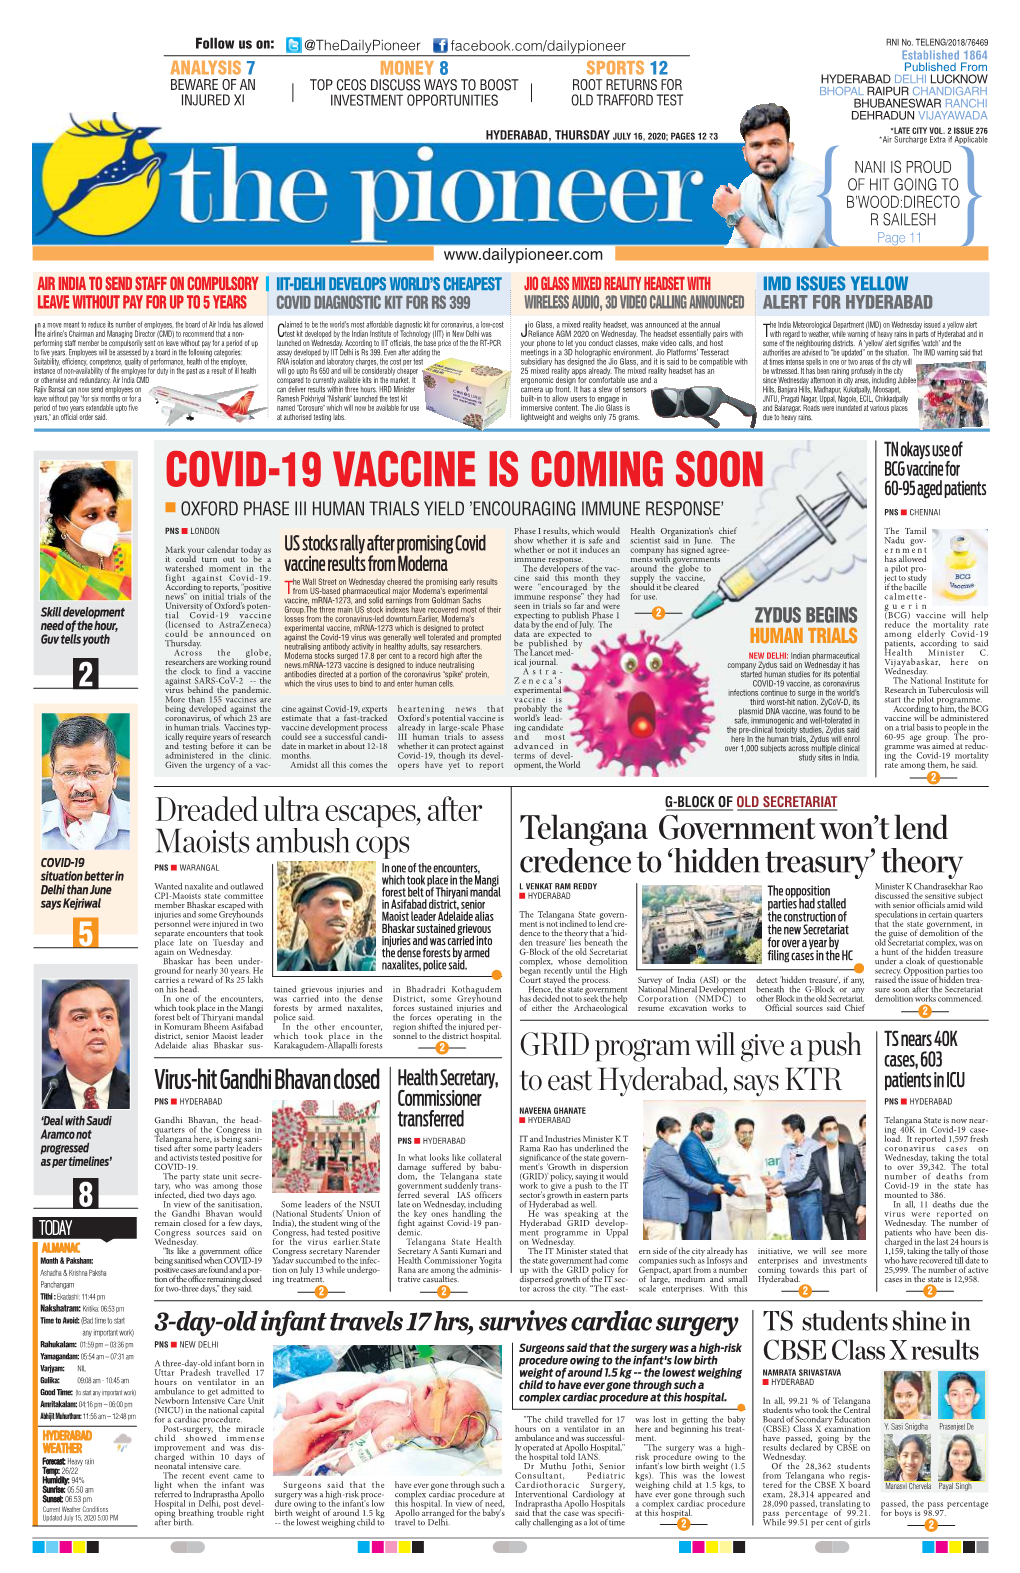 Covid-19 Vaccine Is Coming Soon